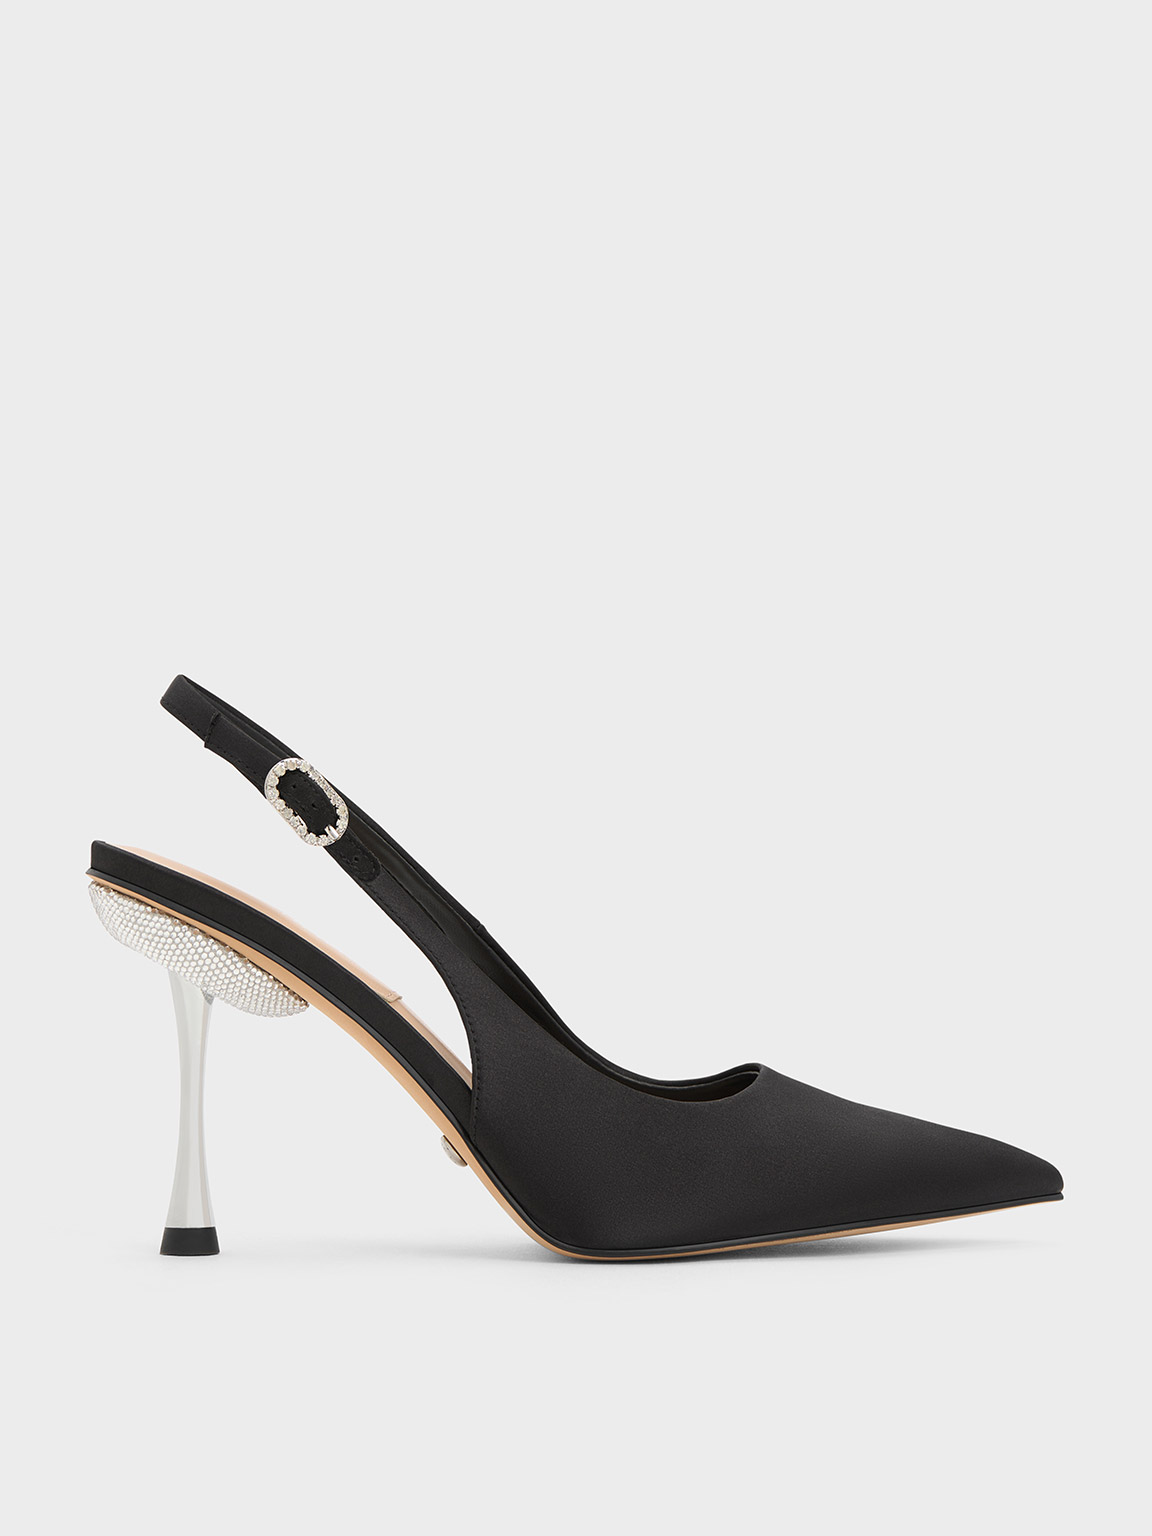 Charles & Keith - Women's Demi Recycled Polyester Slingback Pumps, Black, US 4